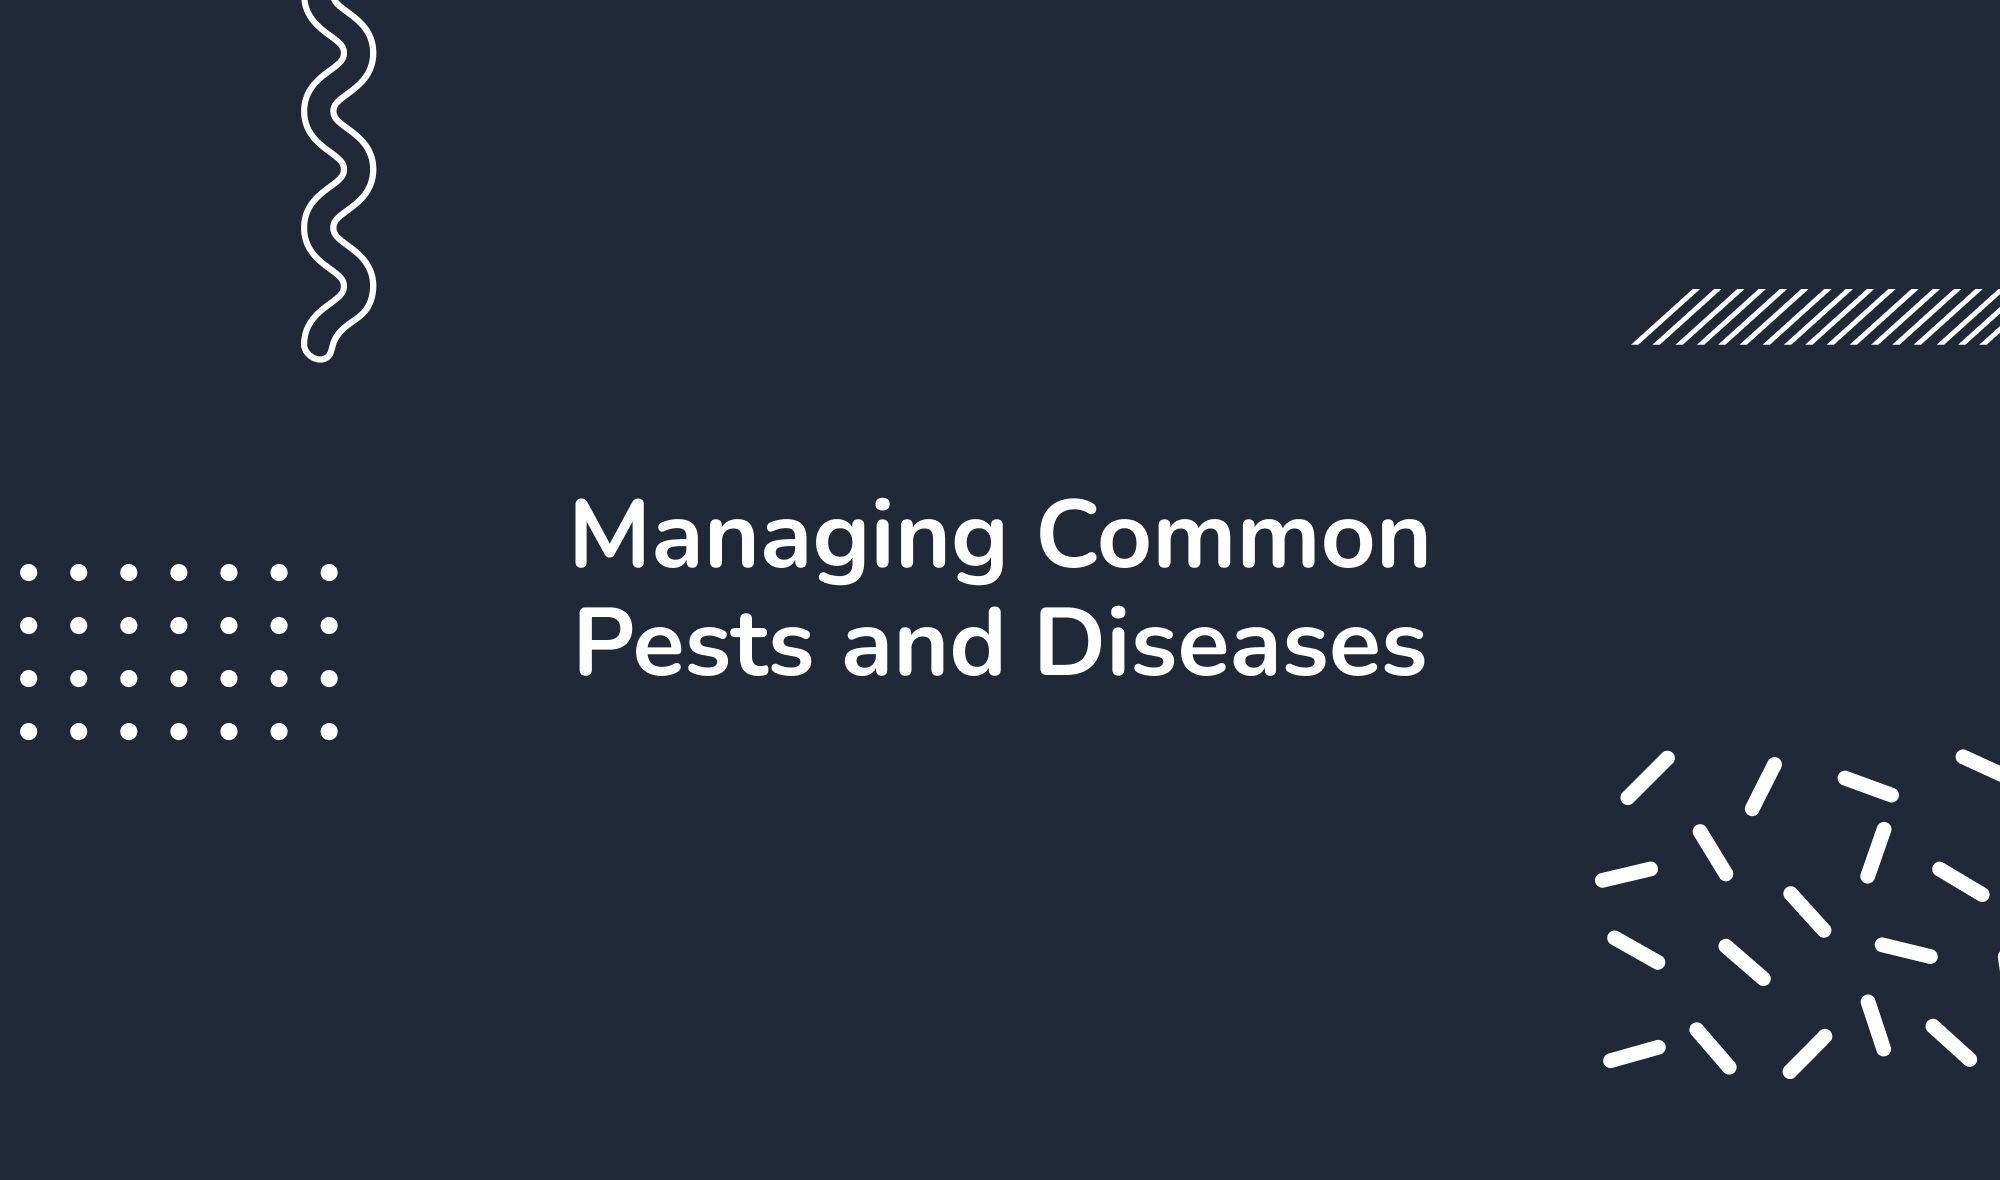 Managing Common Pests and Diseases